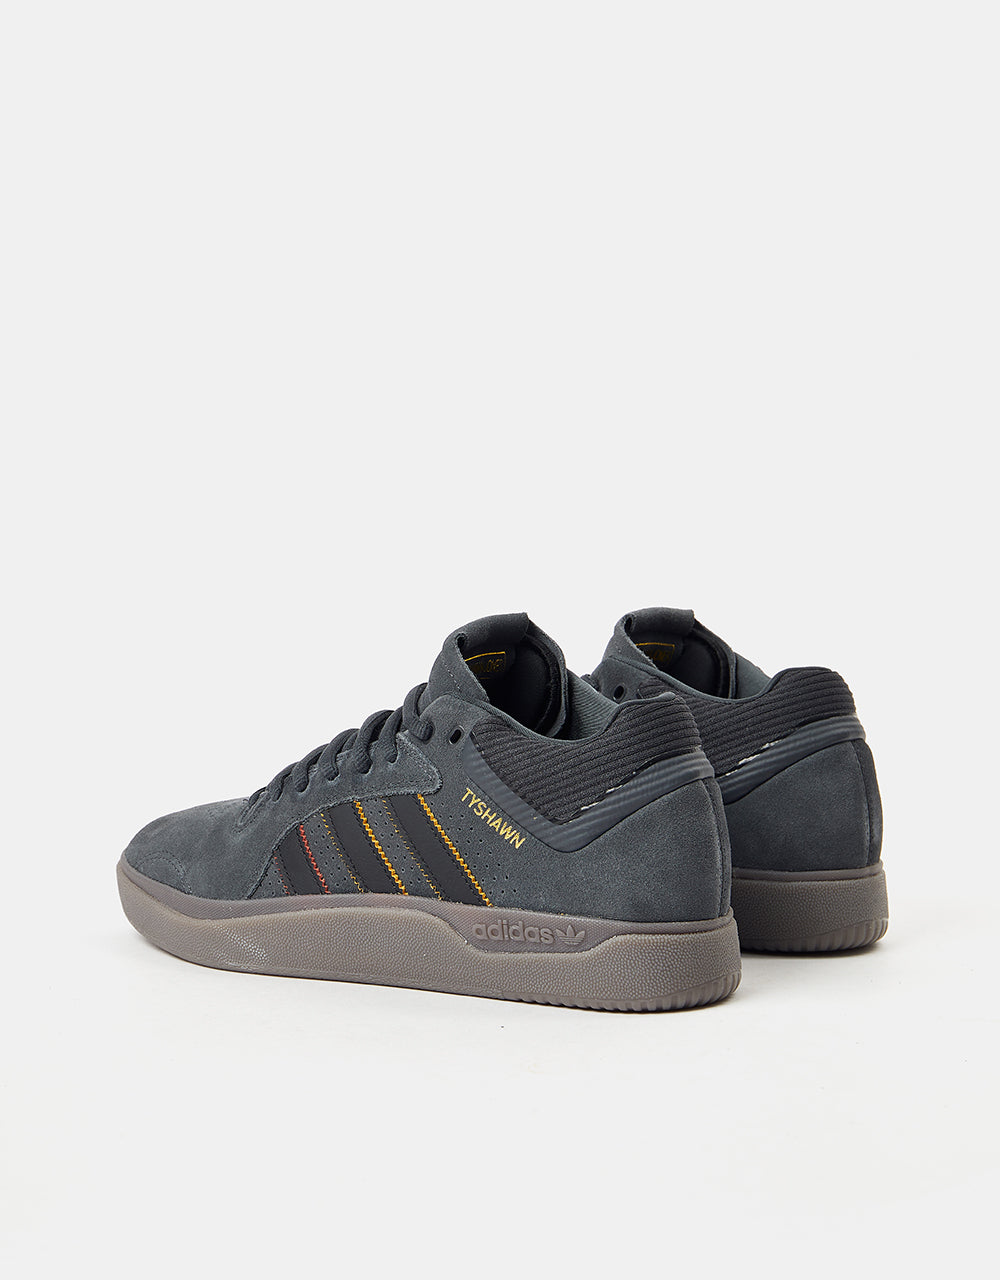 adidas Tyshawn Skate Shoes - Carbon/Core Black/Preloved Brown